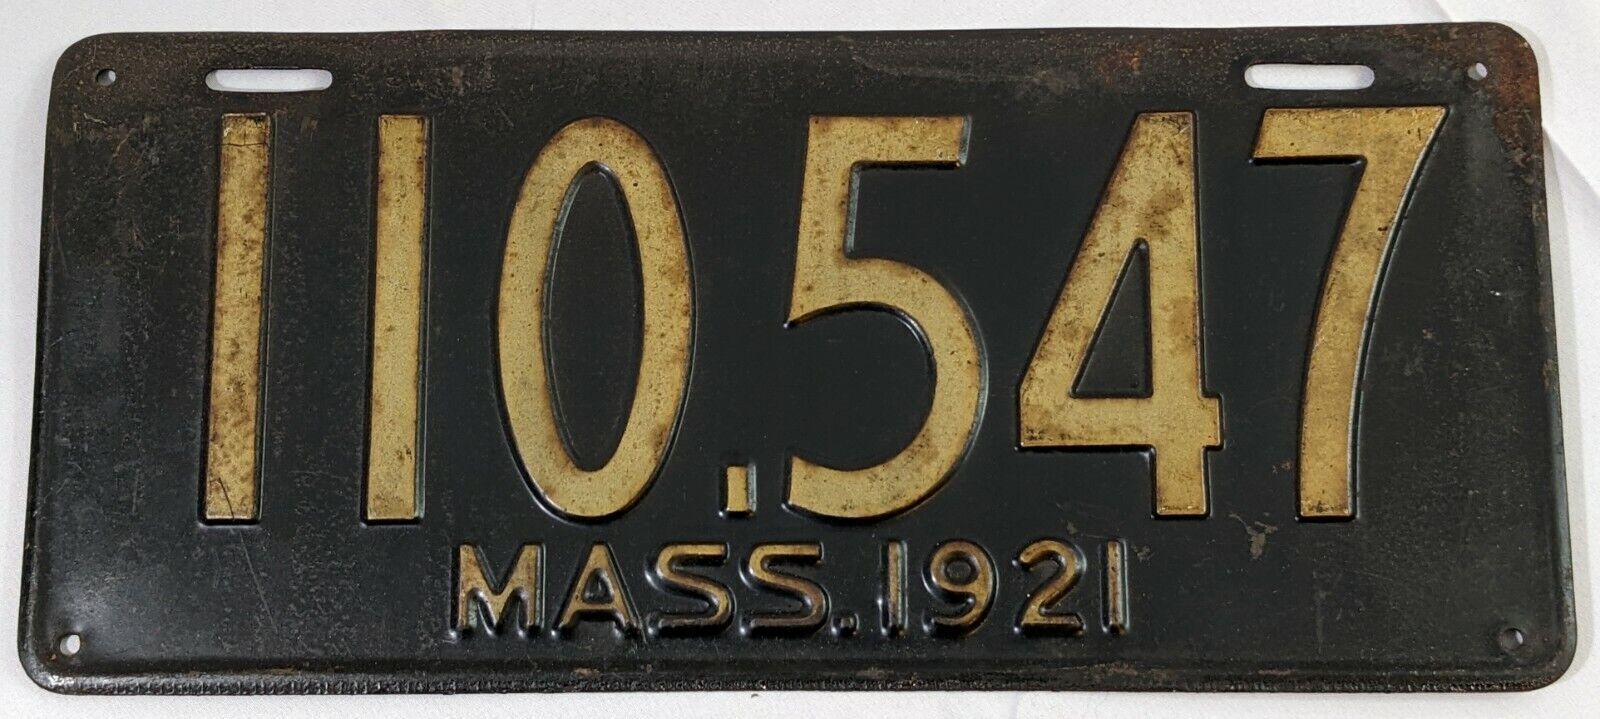 Vintage 1921 Massachusetts Automobile License Plate Number 110.547 Collectible